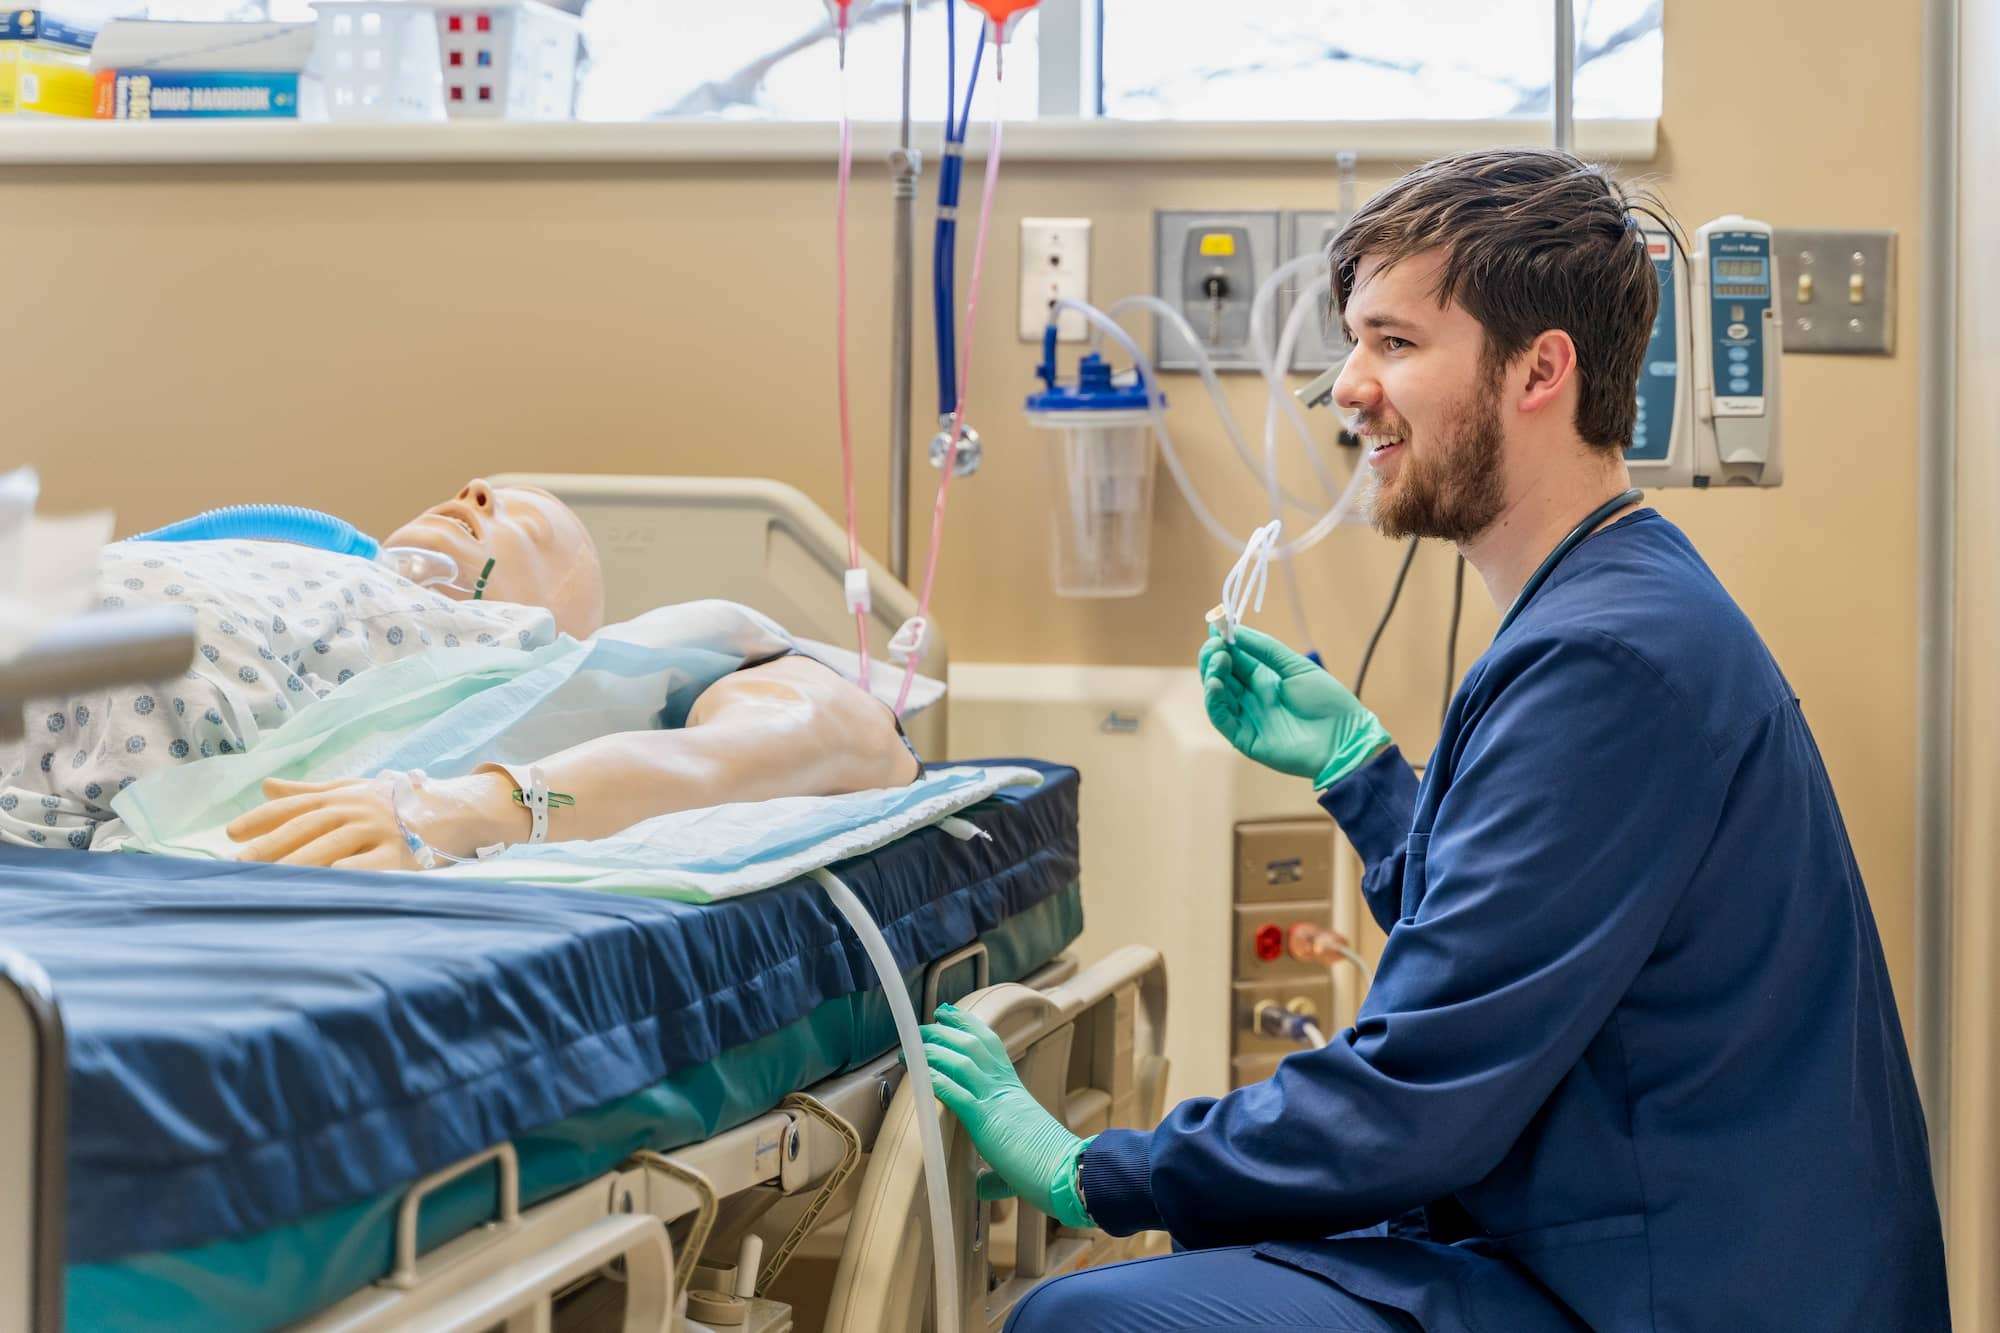 A student smiles while kneeling near the side of a patient's bed and talking with his team.